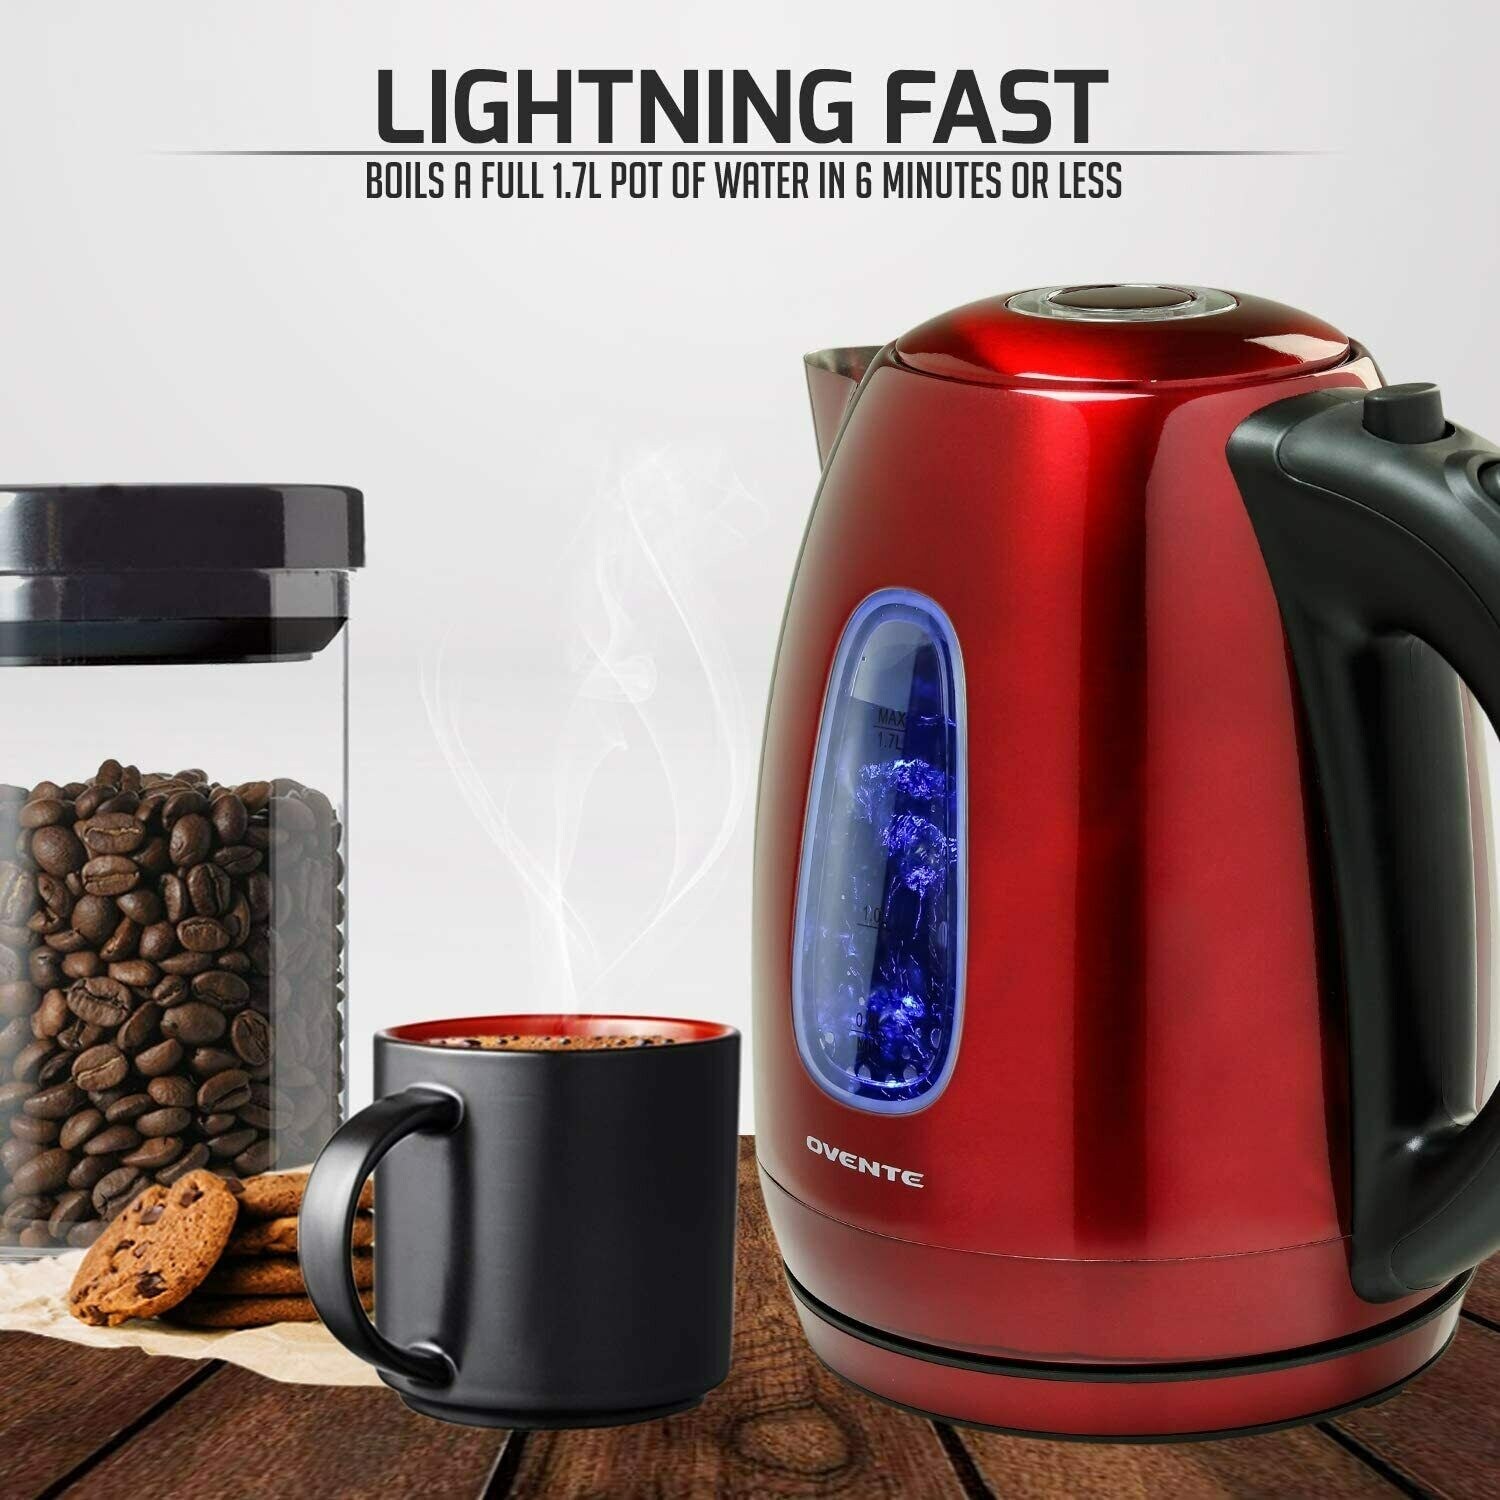 https://ak1.ostkcdn.com/images/products/is/images/direct/74355af041bb5a9c1f0fae758d7cb4e08ff4e975/Ovente-Electric-Kettle-1.7-Liter-with-LED-Indicator-Light-%28KS96-Series%29.jpg